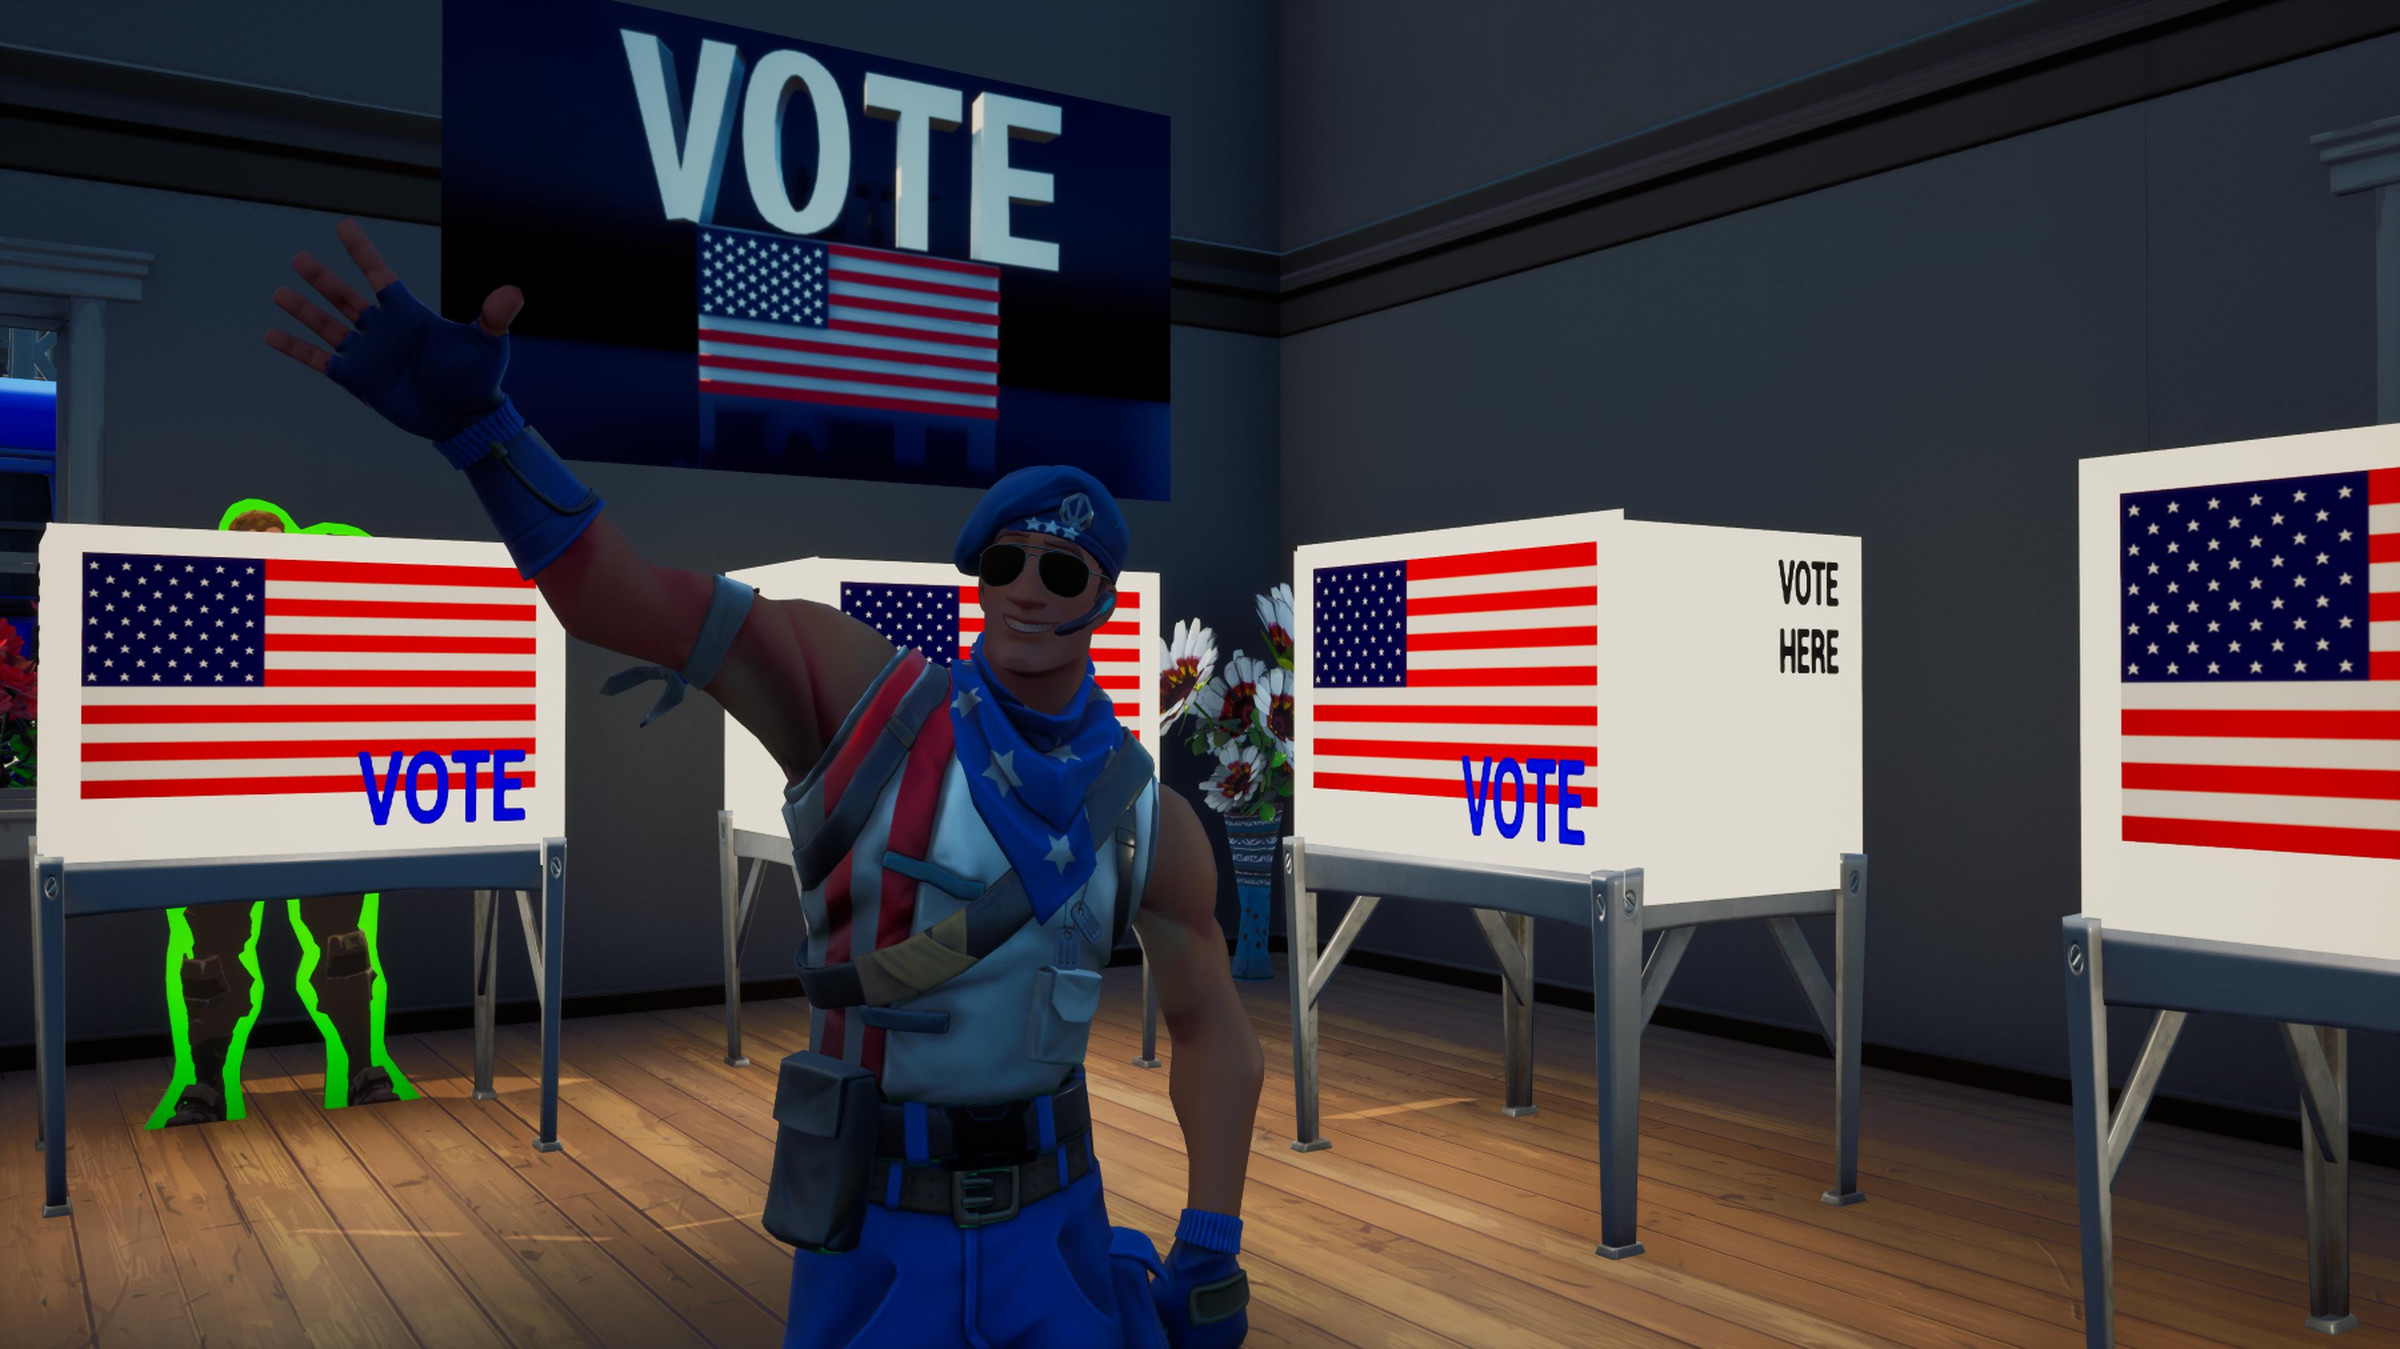 The Biden Fortnite map encourages you to vote